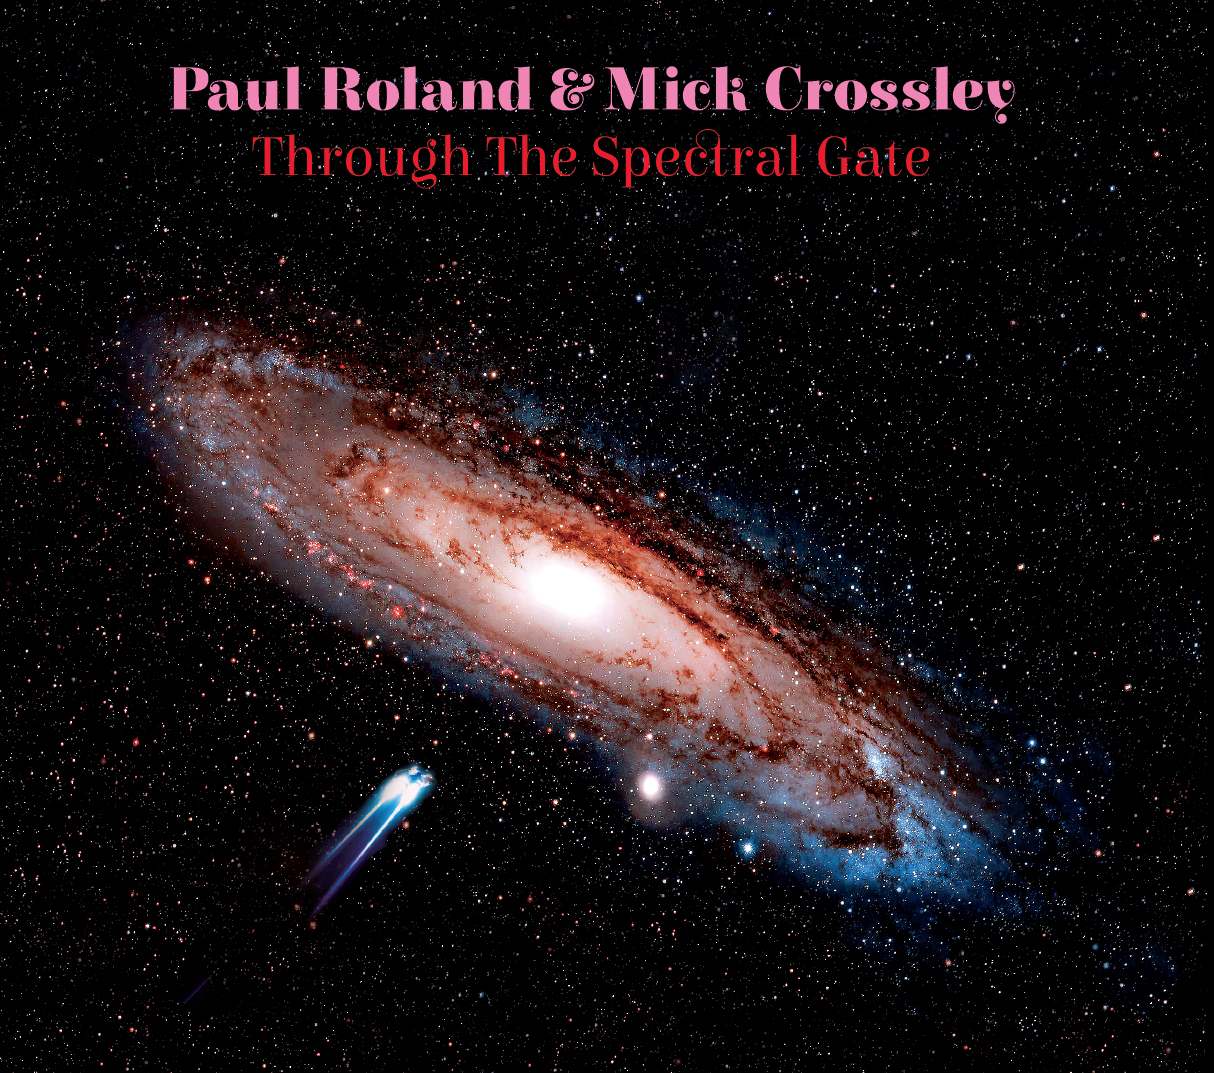 Paul Roland & Mick Crossley - Through The Spectral Gate CD paper